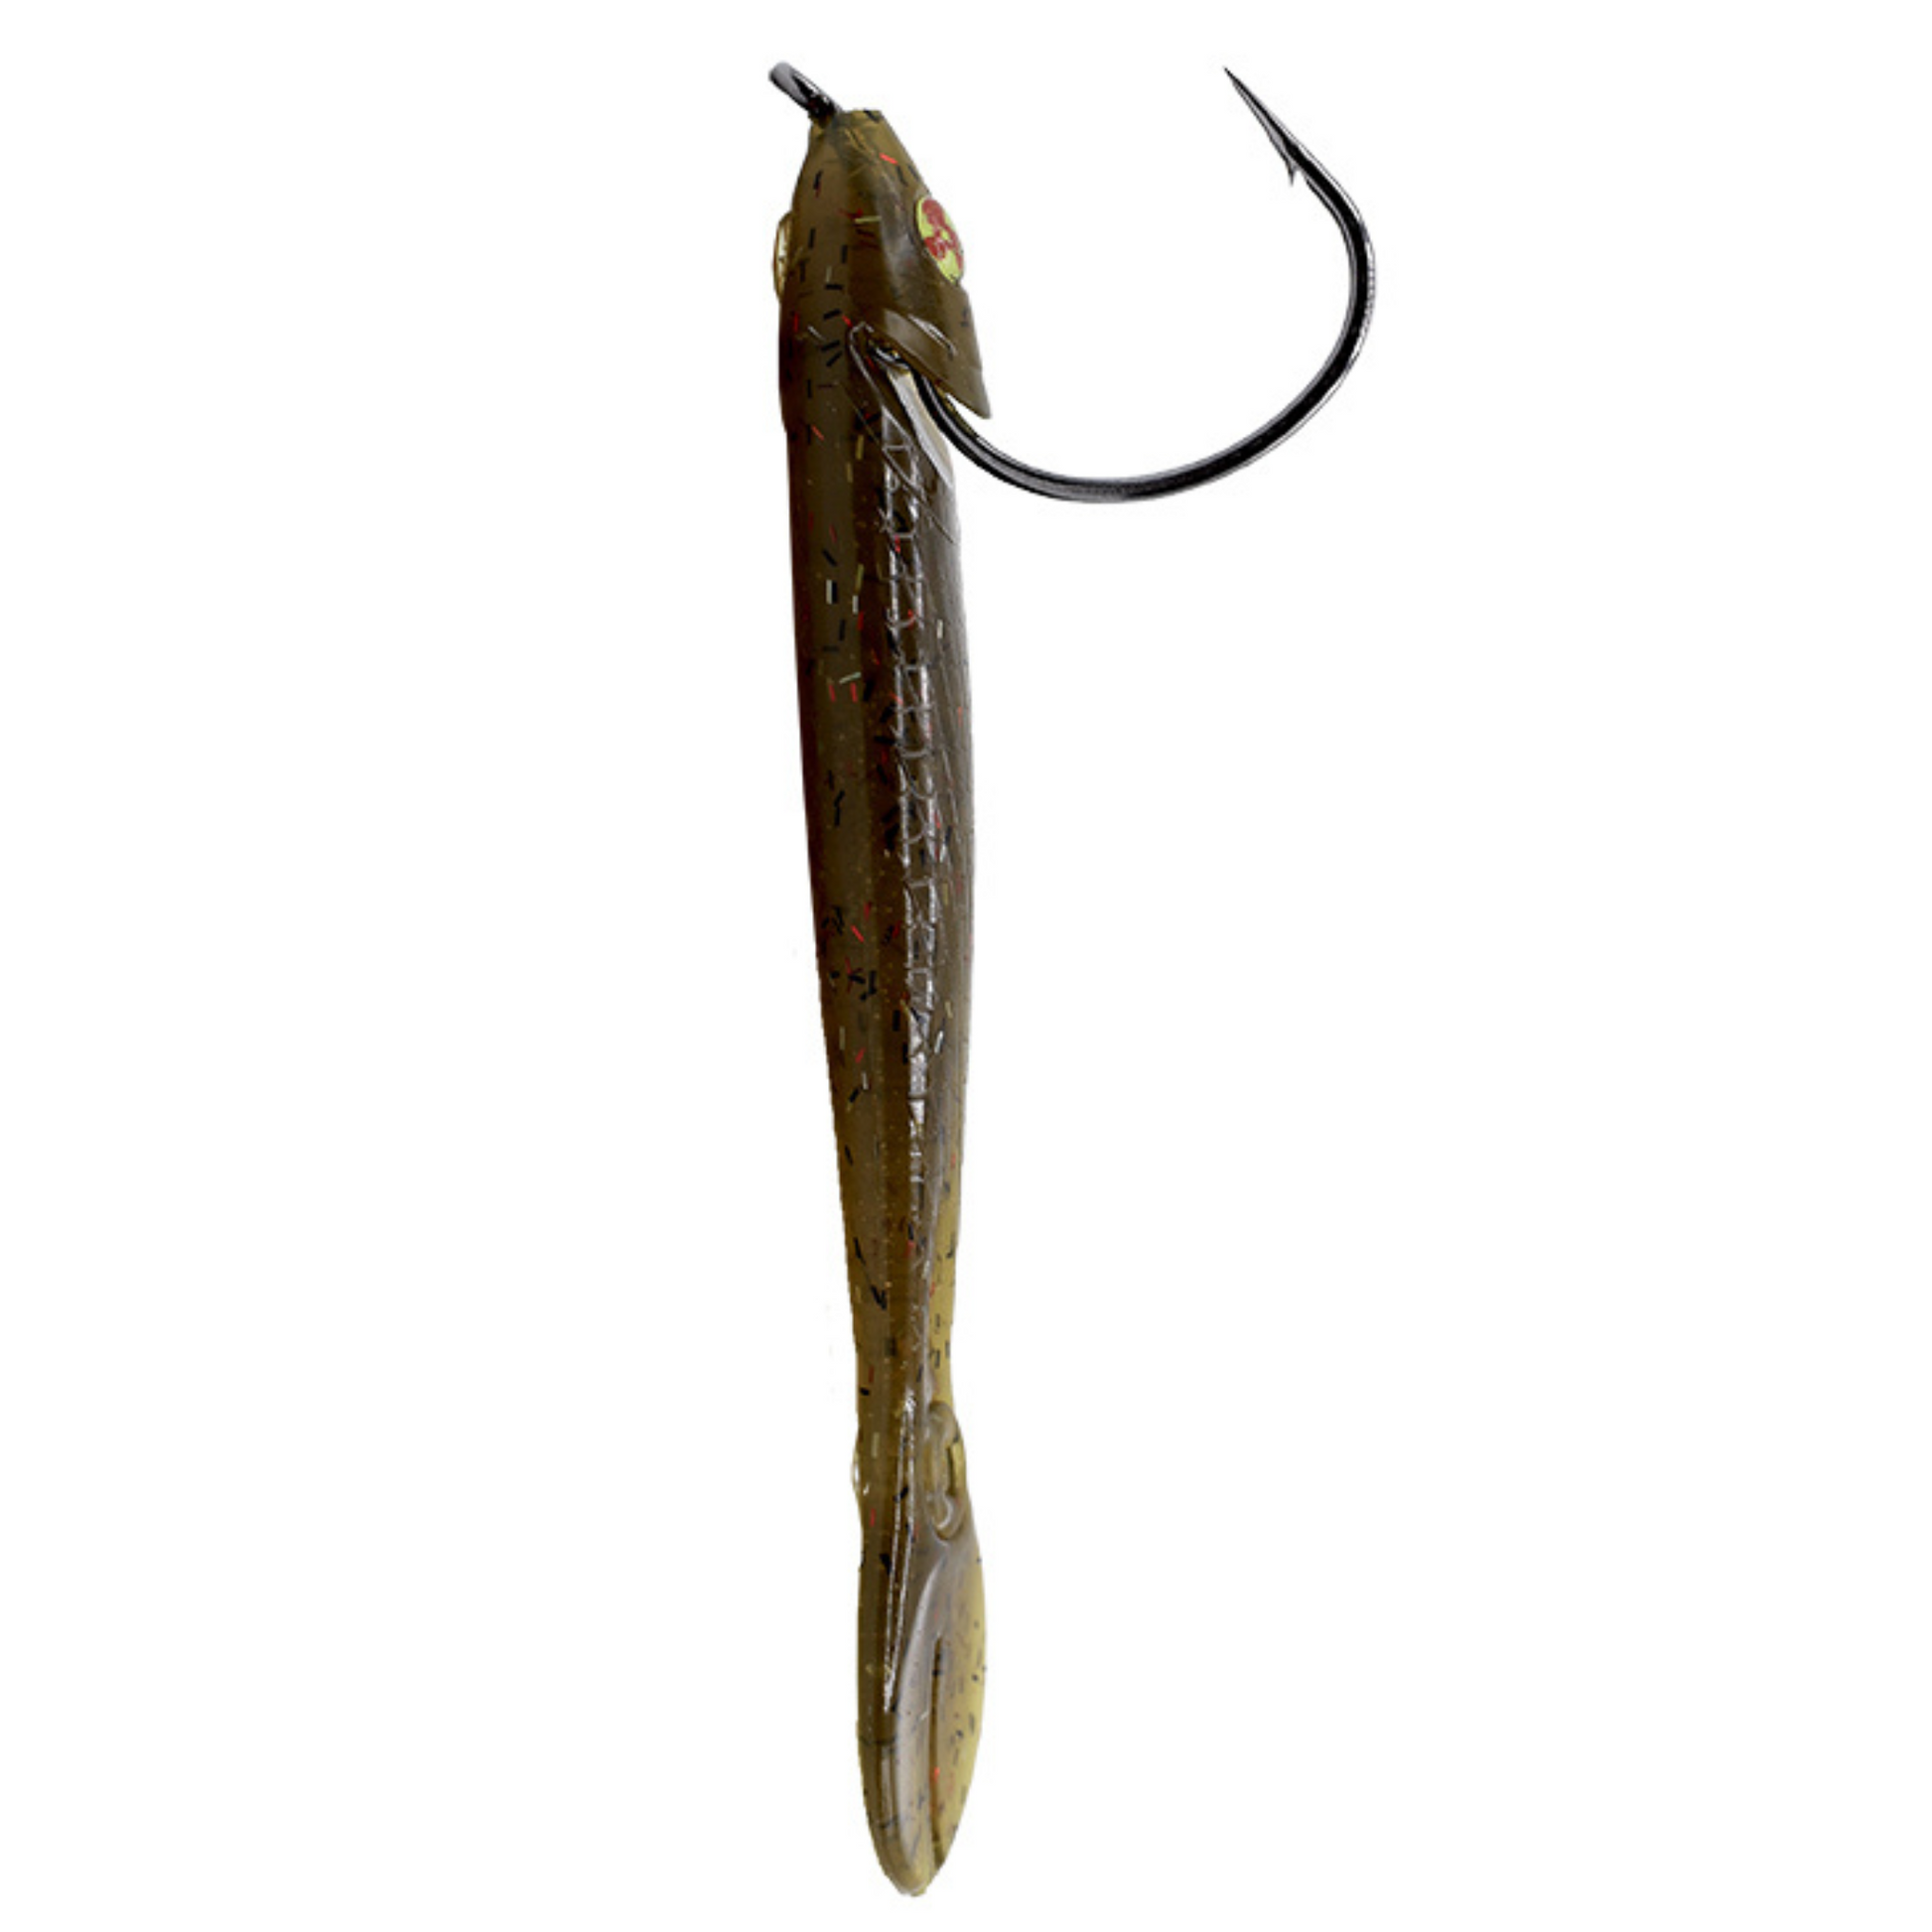 5.25 5pc. Recoil Baits - Green Pumpkin – Lawless Lures